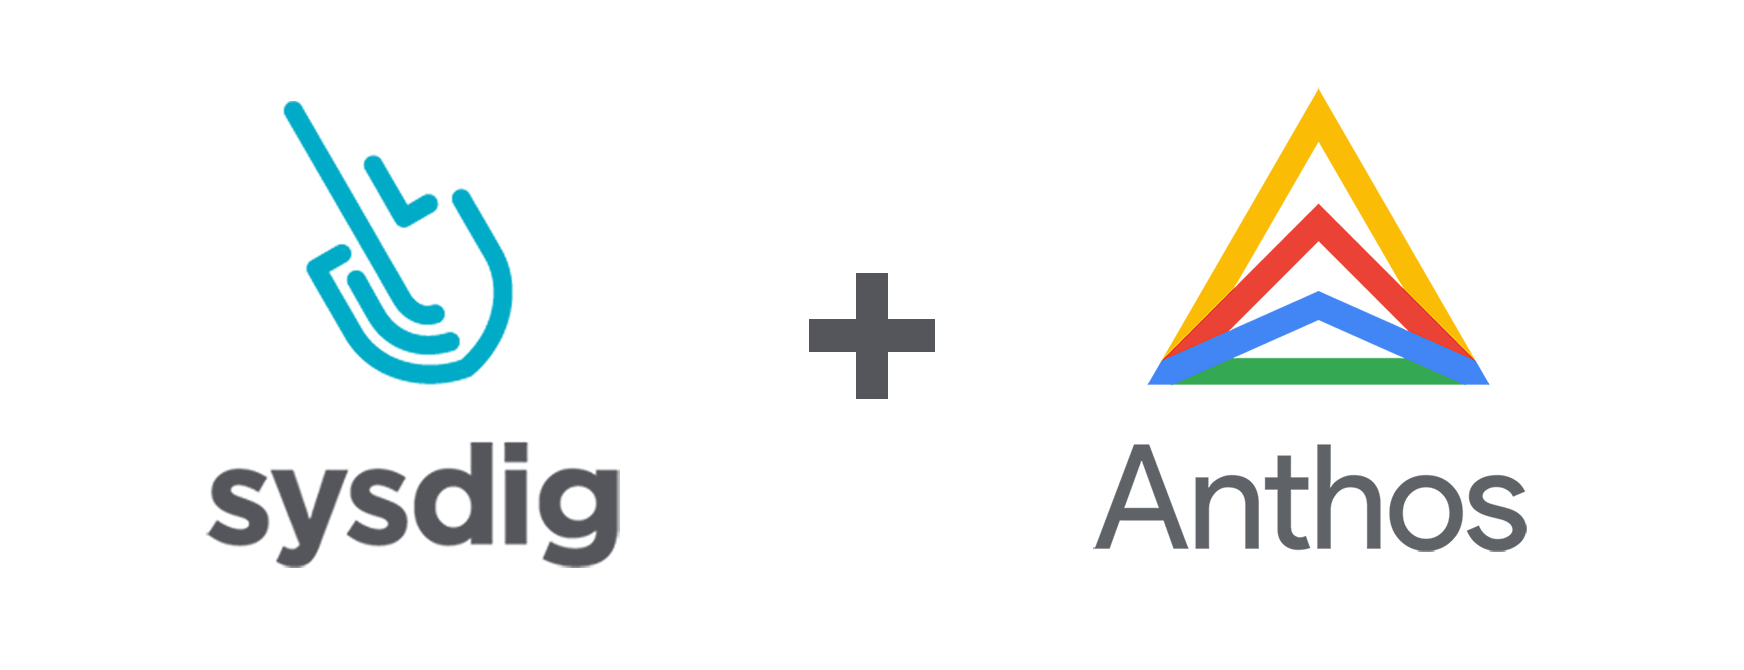 Sysdig and Google Cloud's Anthos